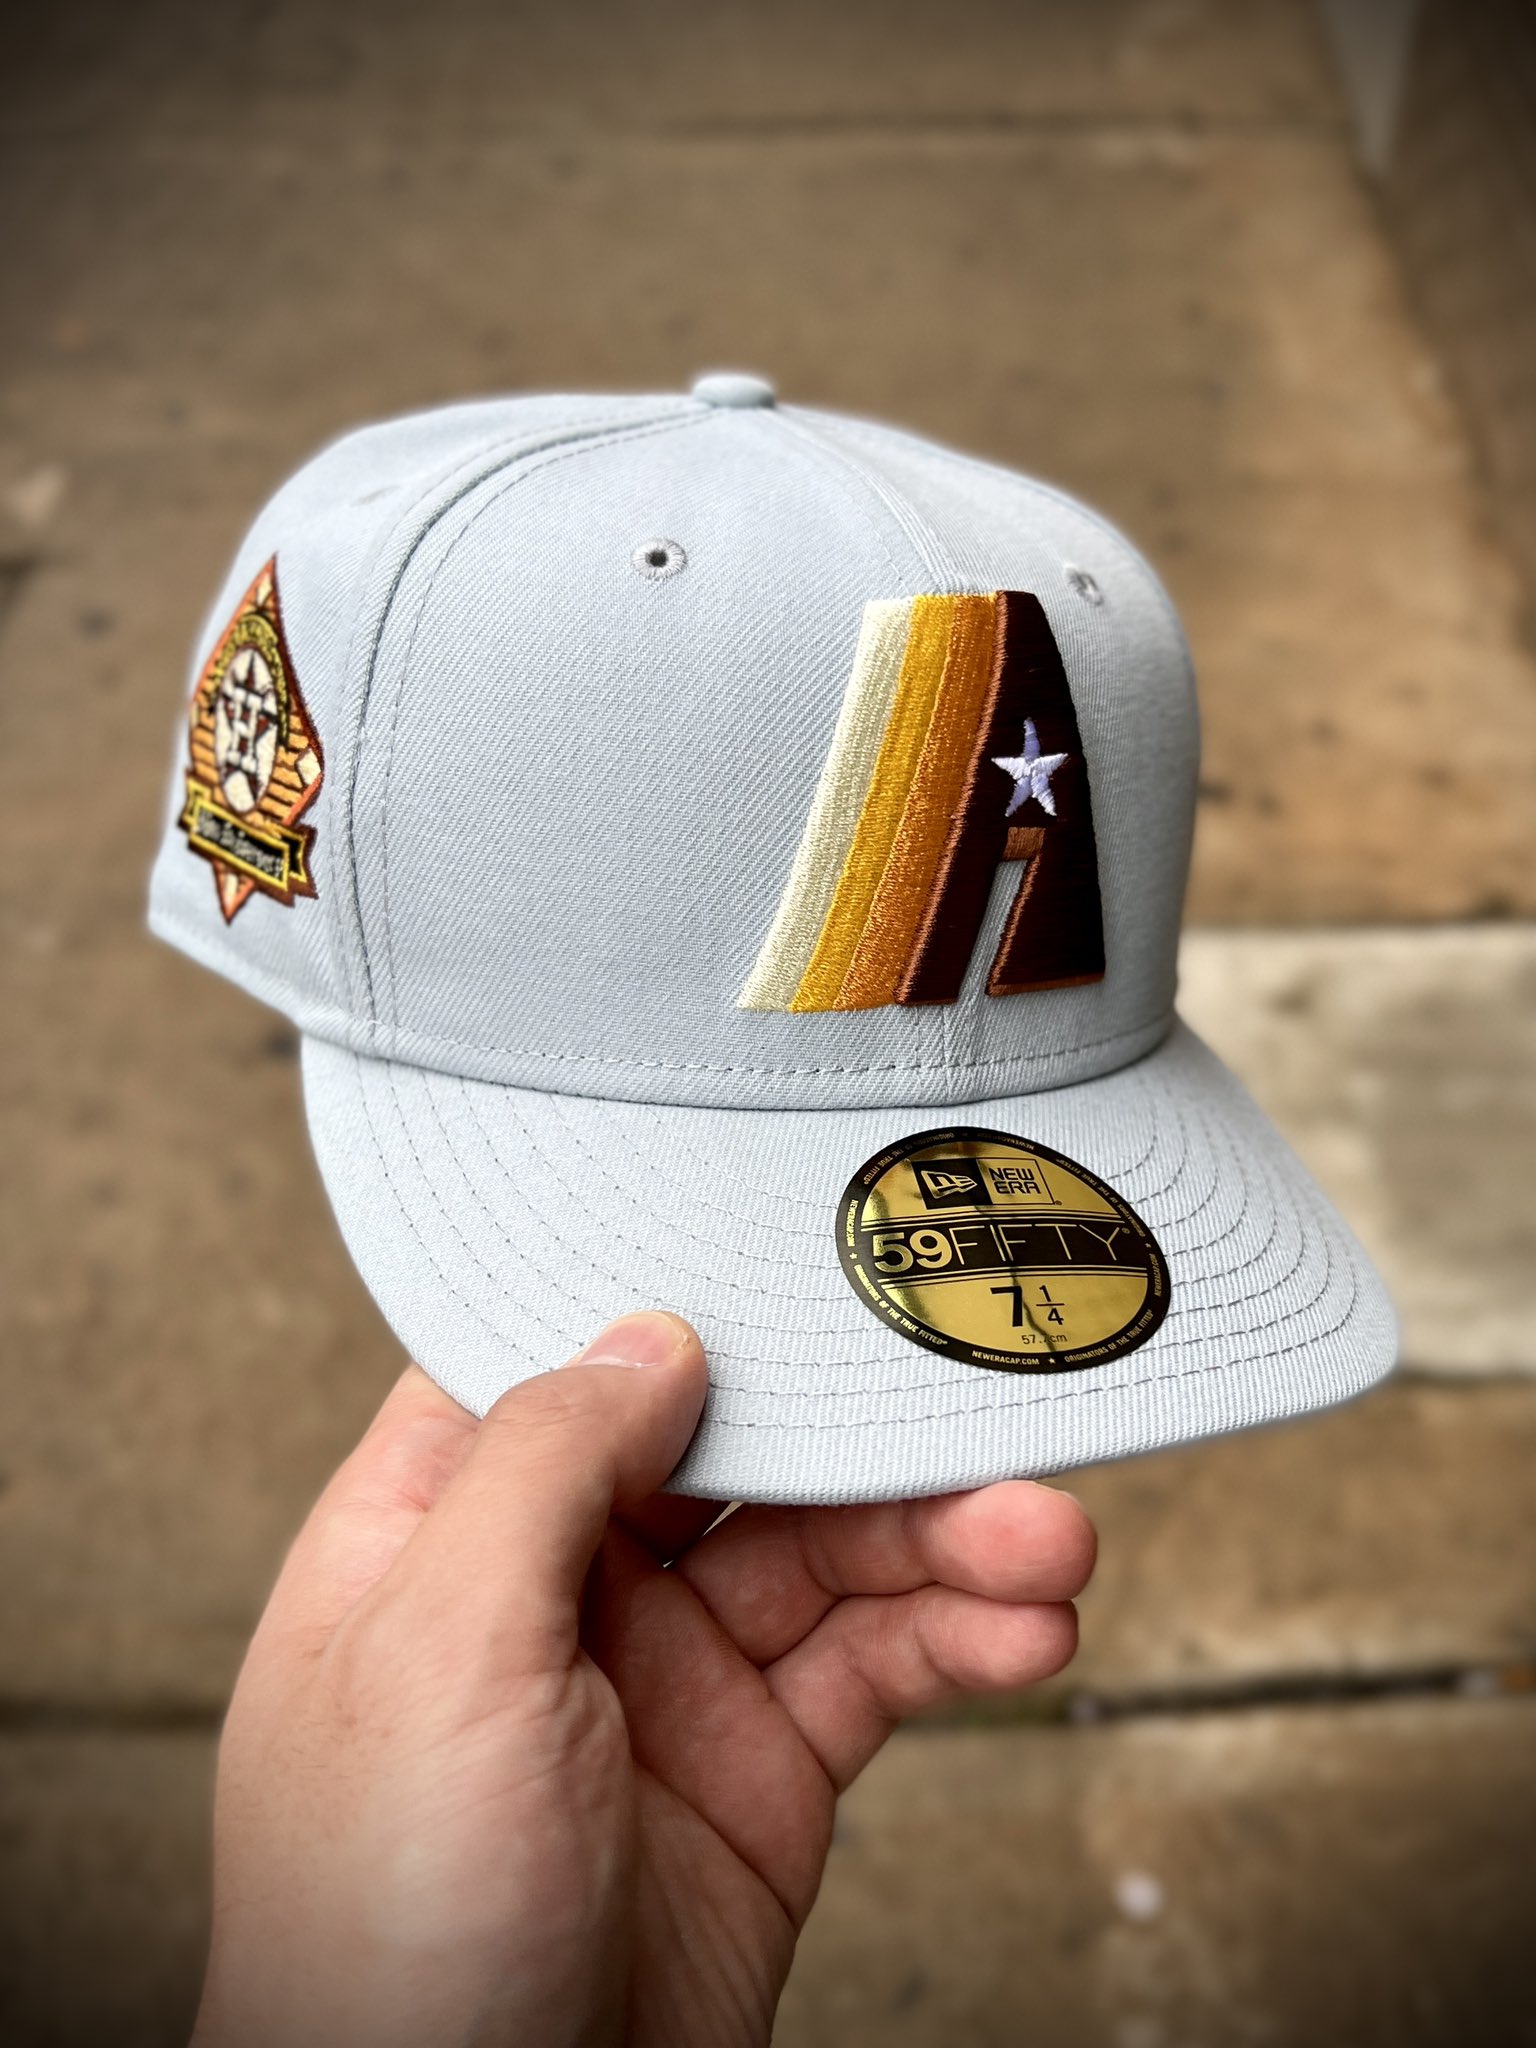 myfitteds.com on X: Houston Astros Silver Anniversary New Era Fitted Cap  inspired by Travis Scott's Cactus Jack Coming Soon to   White Plains and Paterson locations #myfitteds  #newera #houstonastros #cactusjack #travisscott